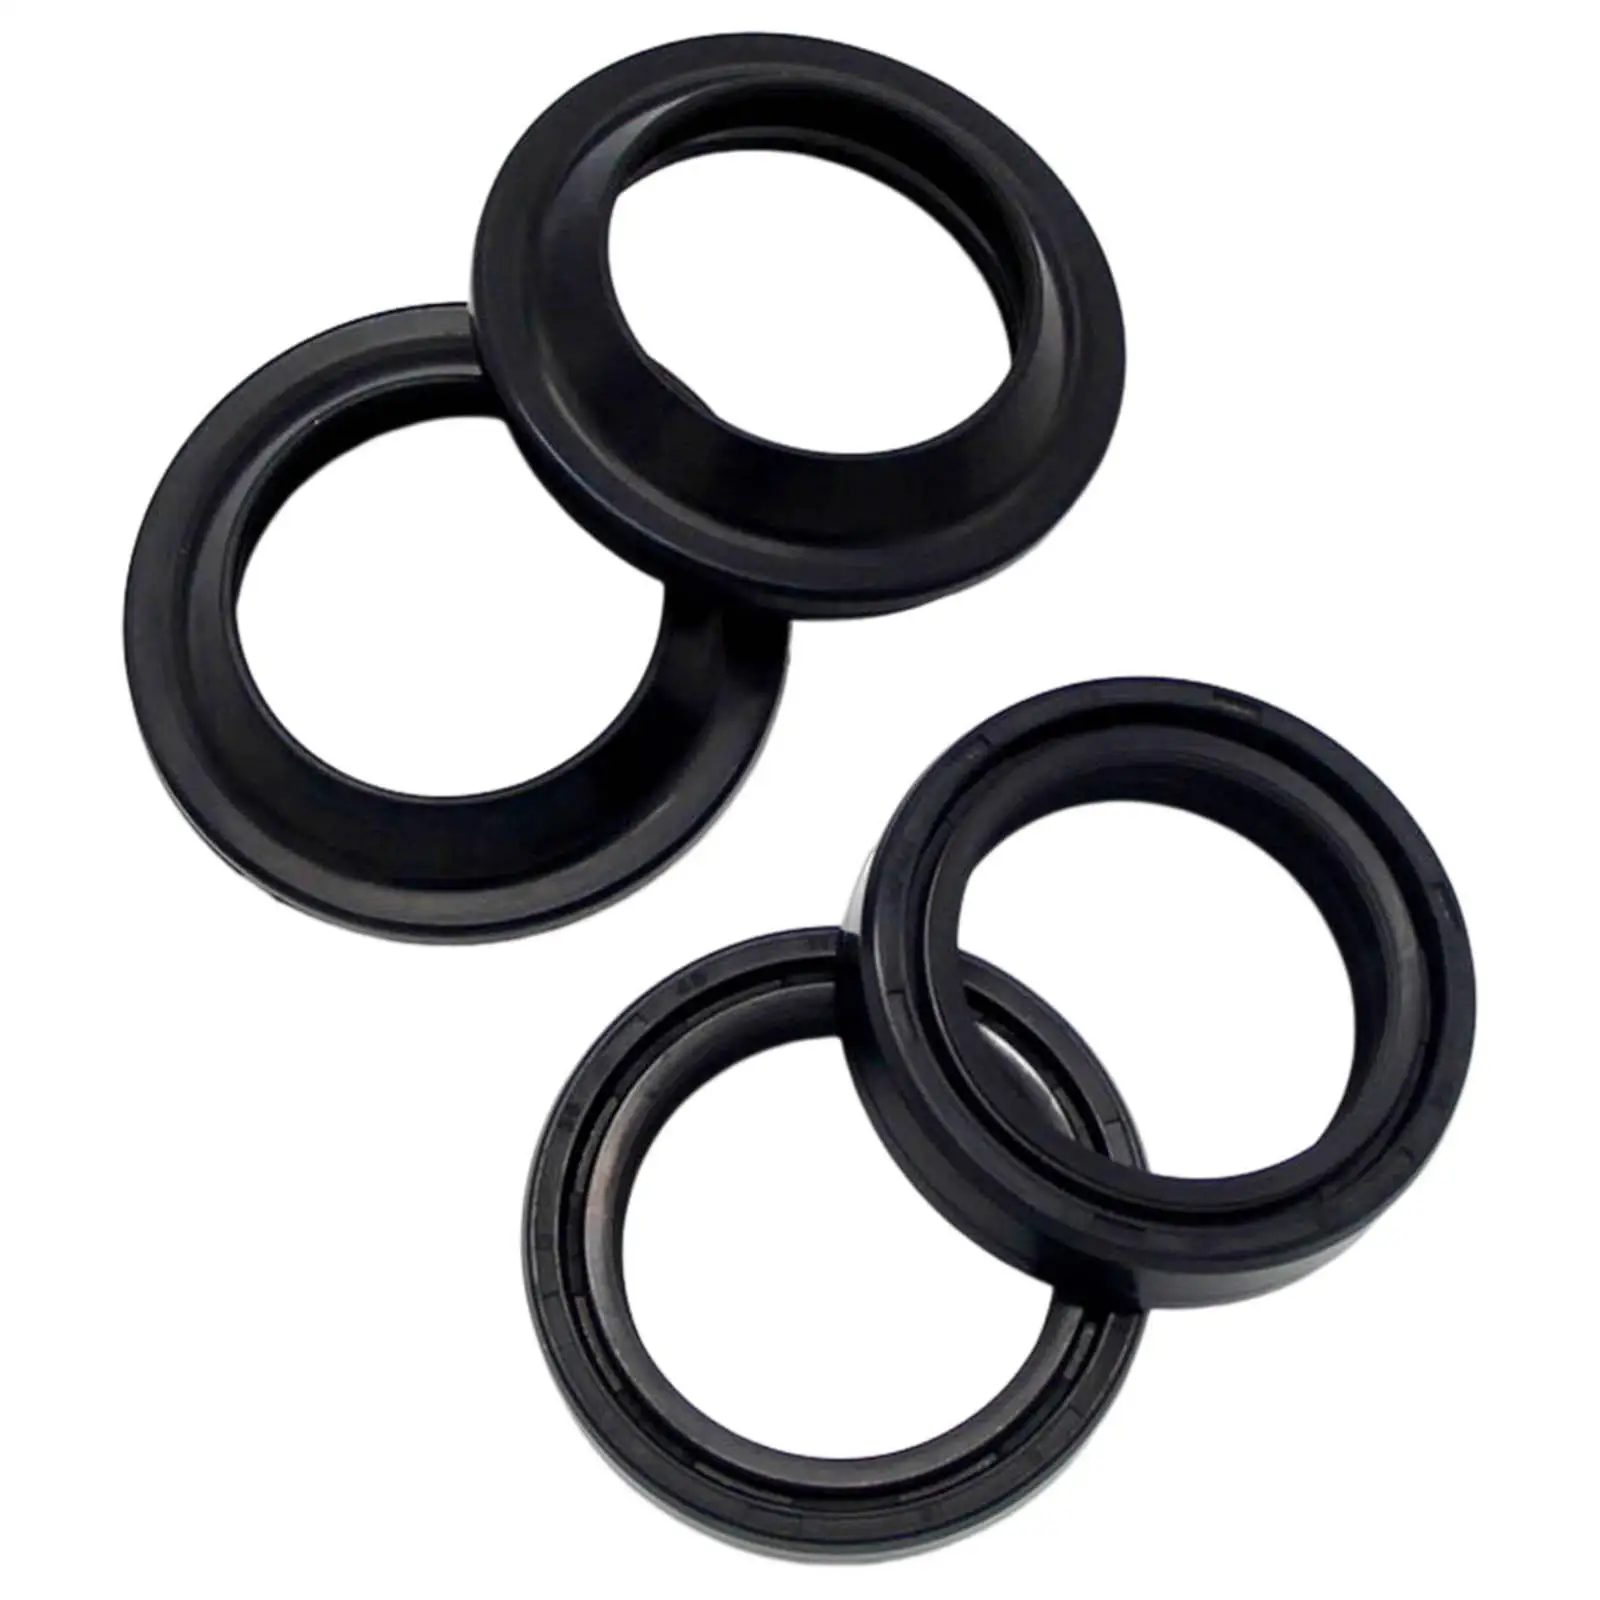 Motorcycle Front Fork Oil Seal and Dust Seal Kit 35x48x11mm for Honda